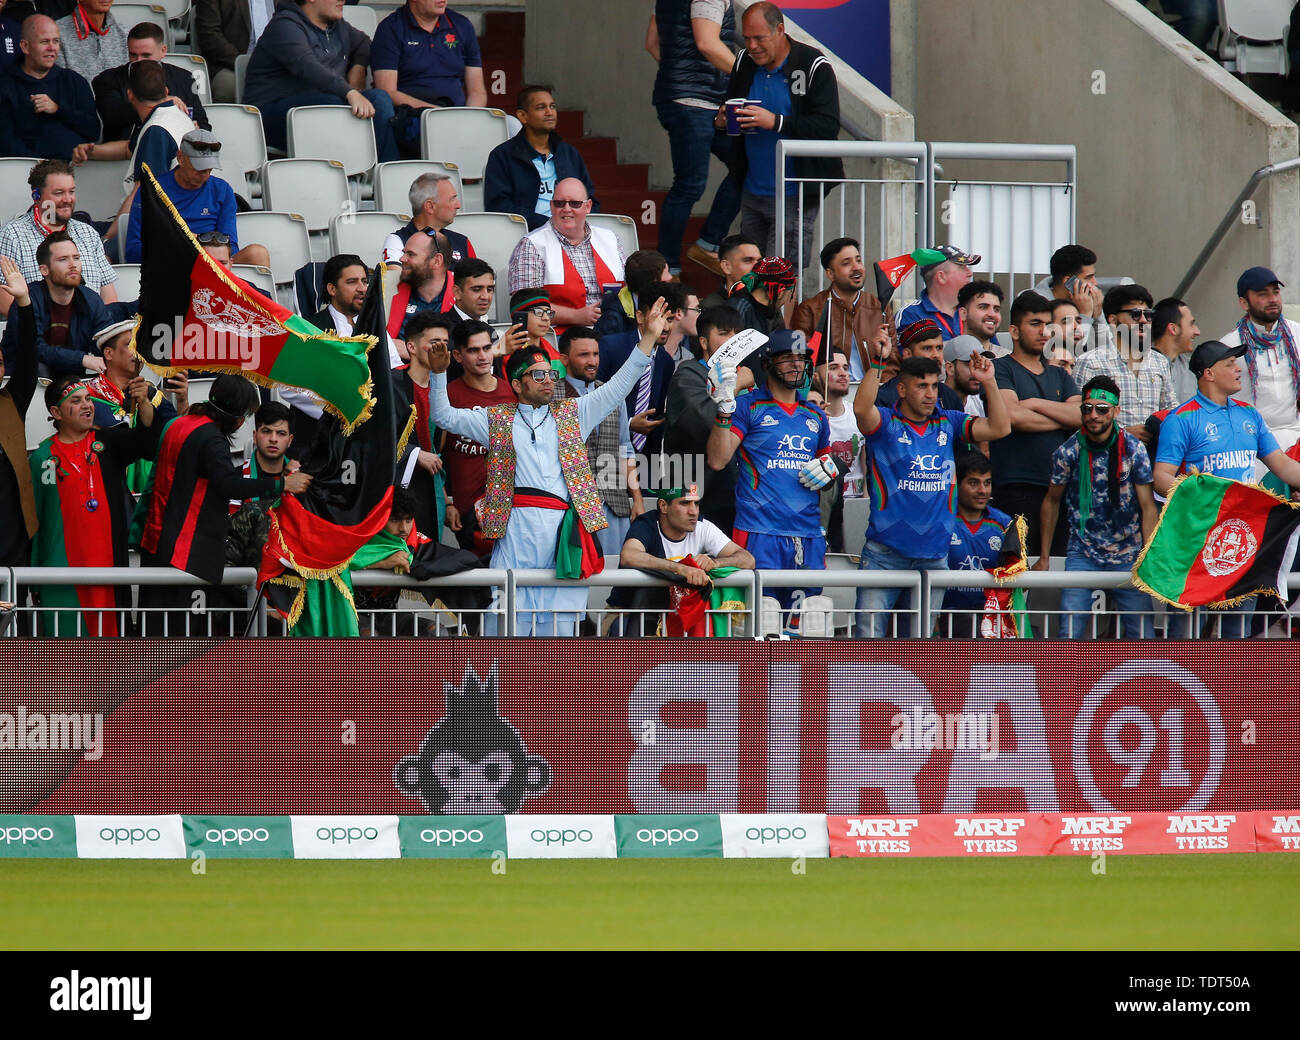 Old Trafford Manchester Uk 18th June 2019 Icc World Cup Cricket England Versus Afghanistan